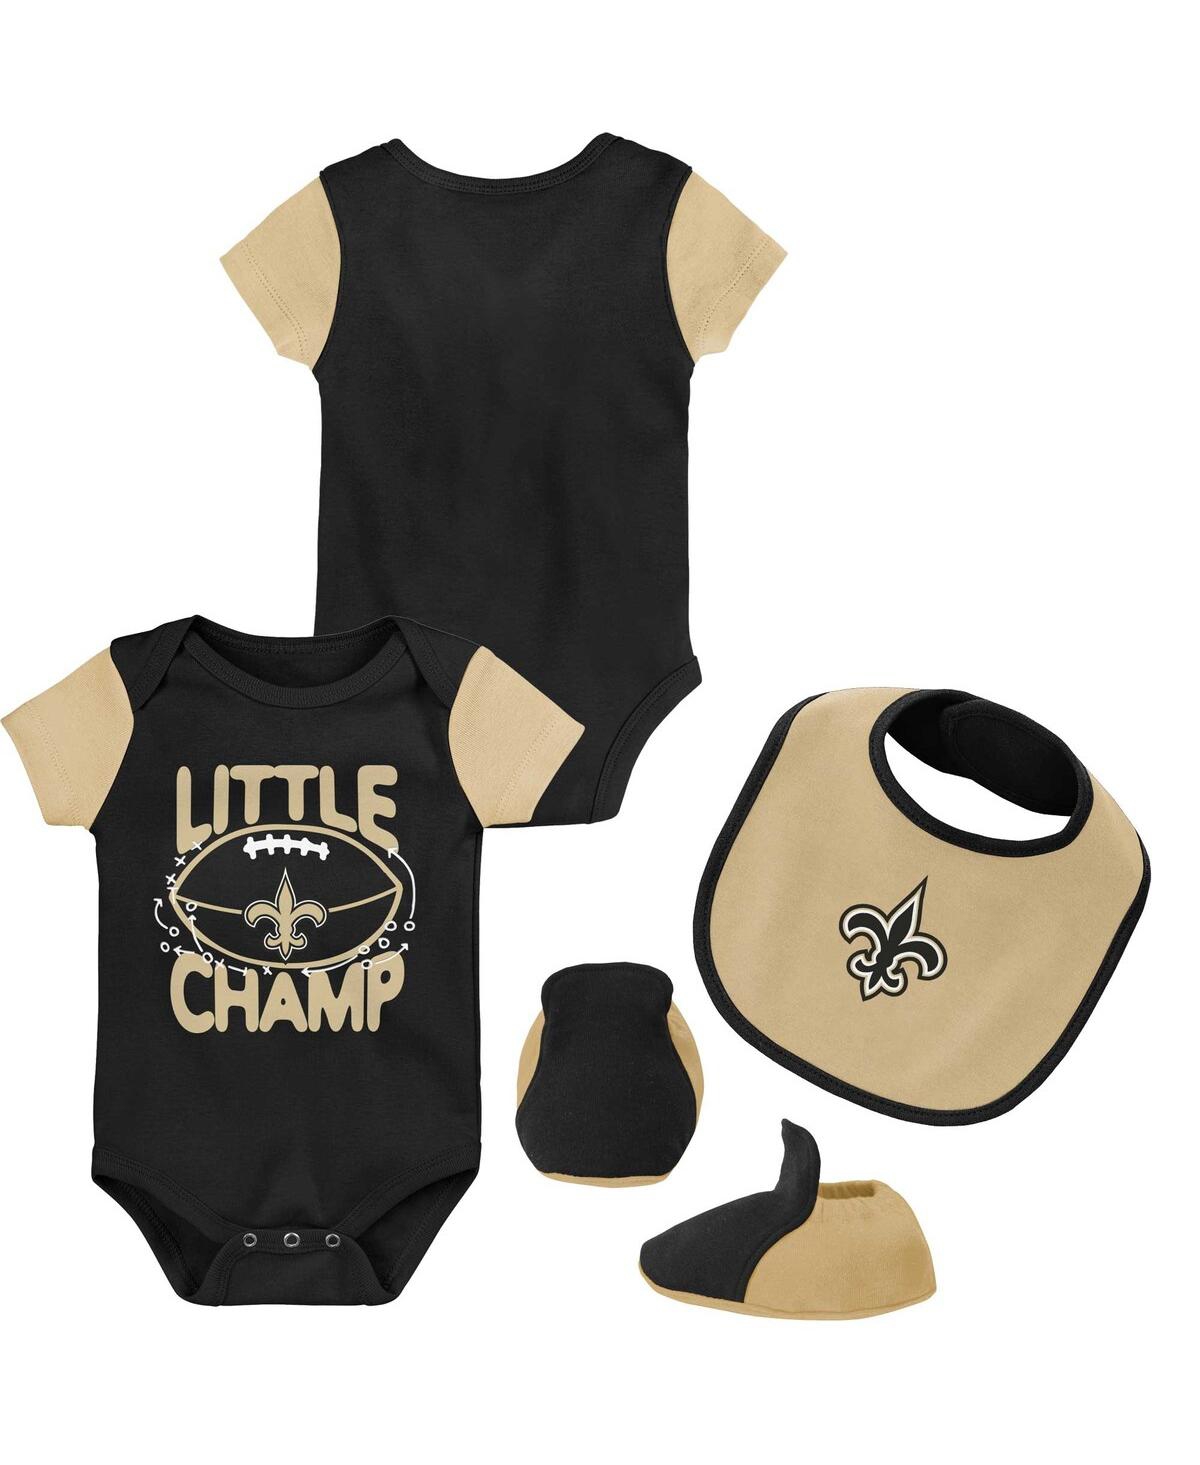 Outerstuff Babies' Newborn And Infant Boys And Girls Black, Gold New Orleans Saints Little Champ Three-piece Bodysuit B